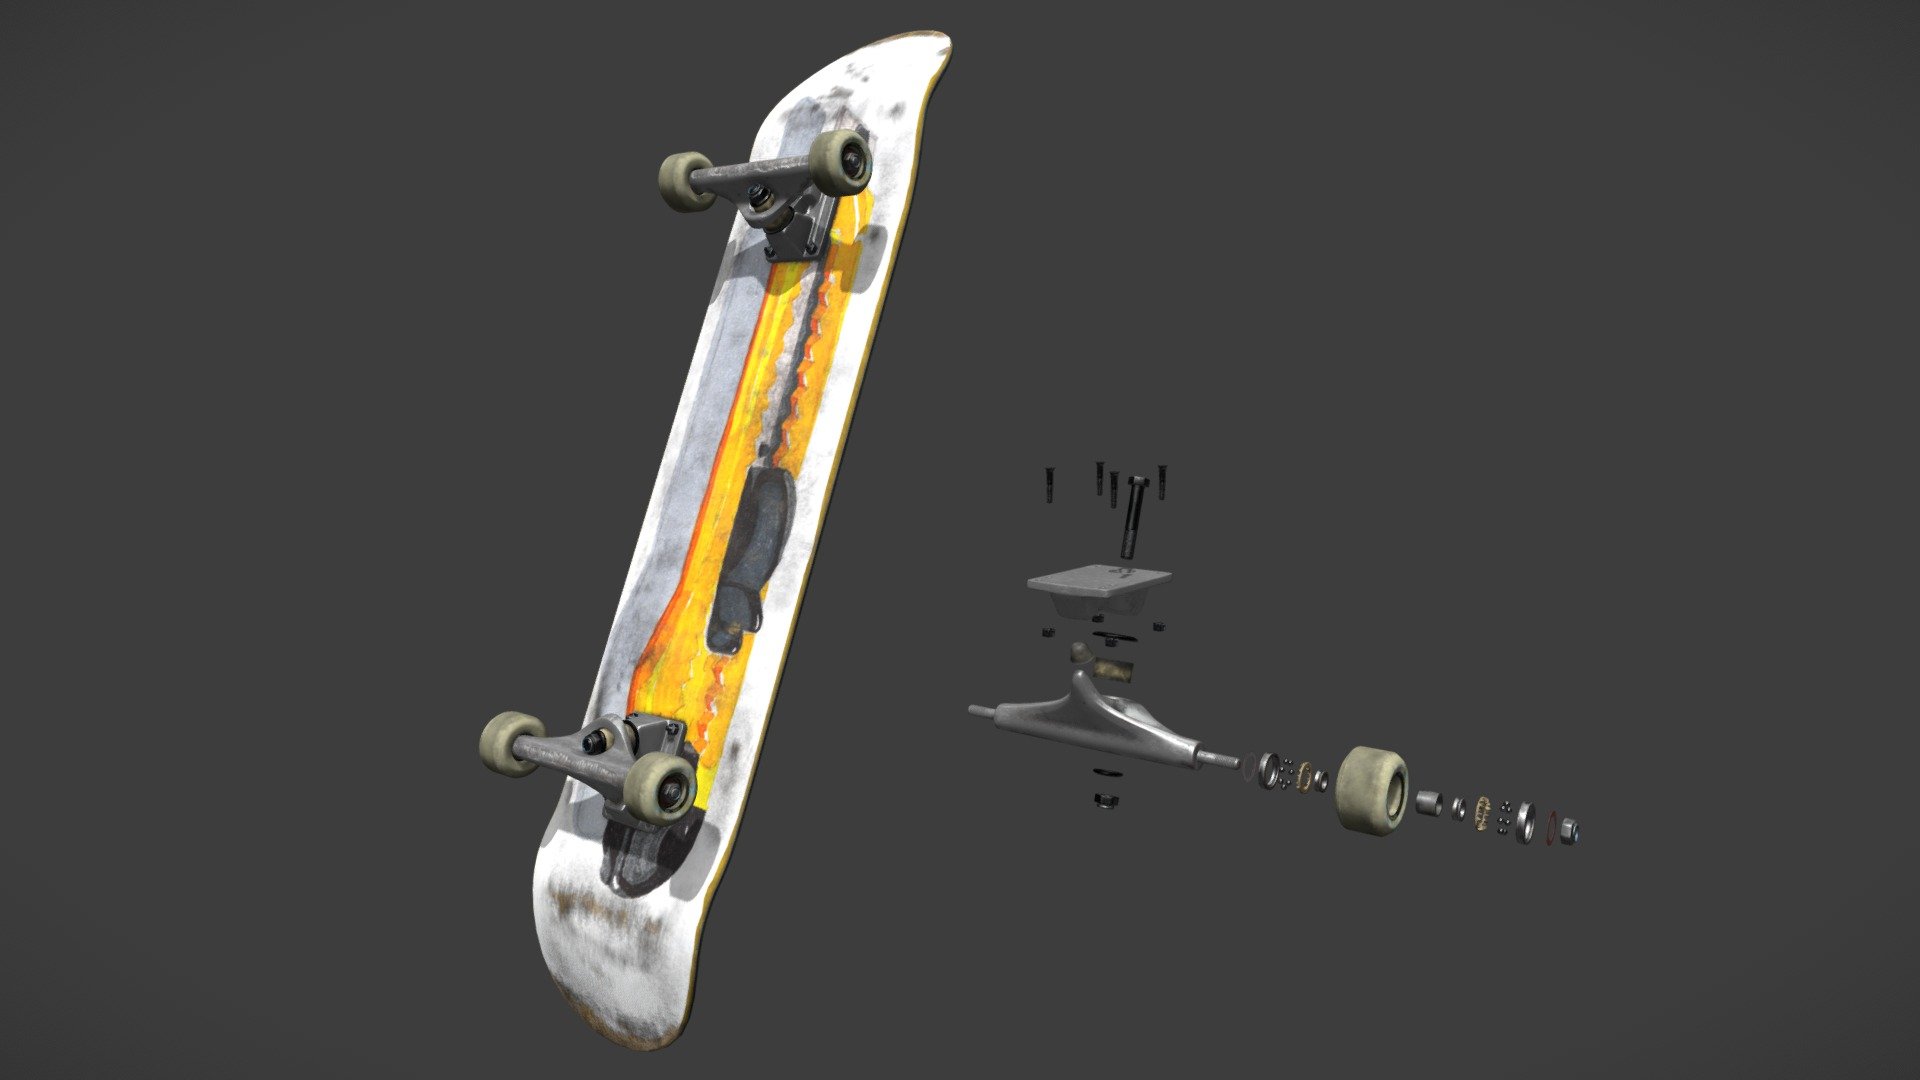 High resolution skatebord model with all of its parts. Real life scale. (8.5″ deck)

No branding, deck design is original.

Has one 4K texture for the deck and five 2K textures for the rest of the parts. All PBR. 
(base color, height, metalic, AO, normal - directX, roughness)

In aditional files is a .blend file with all parts rigged to emptys using drivers. You can easily crate animations like this:
https://www.youtube.com/watch?v=wYjkYkGS3AI
https://sketchfab.com/3d-models/my-skateboard-animated-parts-50dca00bdcff44689afda58c3ea6eda9
(same model, different textures)

Enjoy! - Skateboard - Buy Royalty Free 3D model by vojtaklemperer 3d model